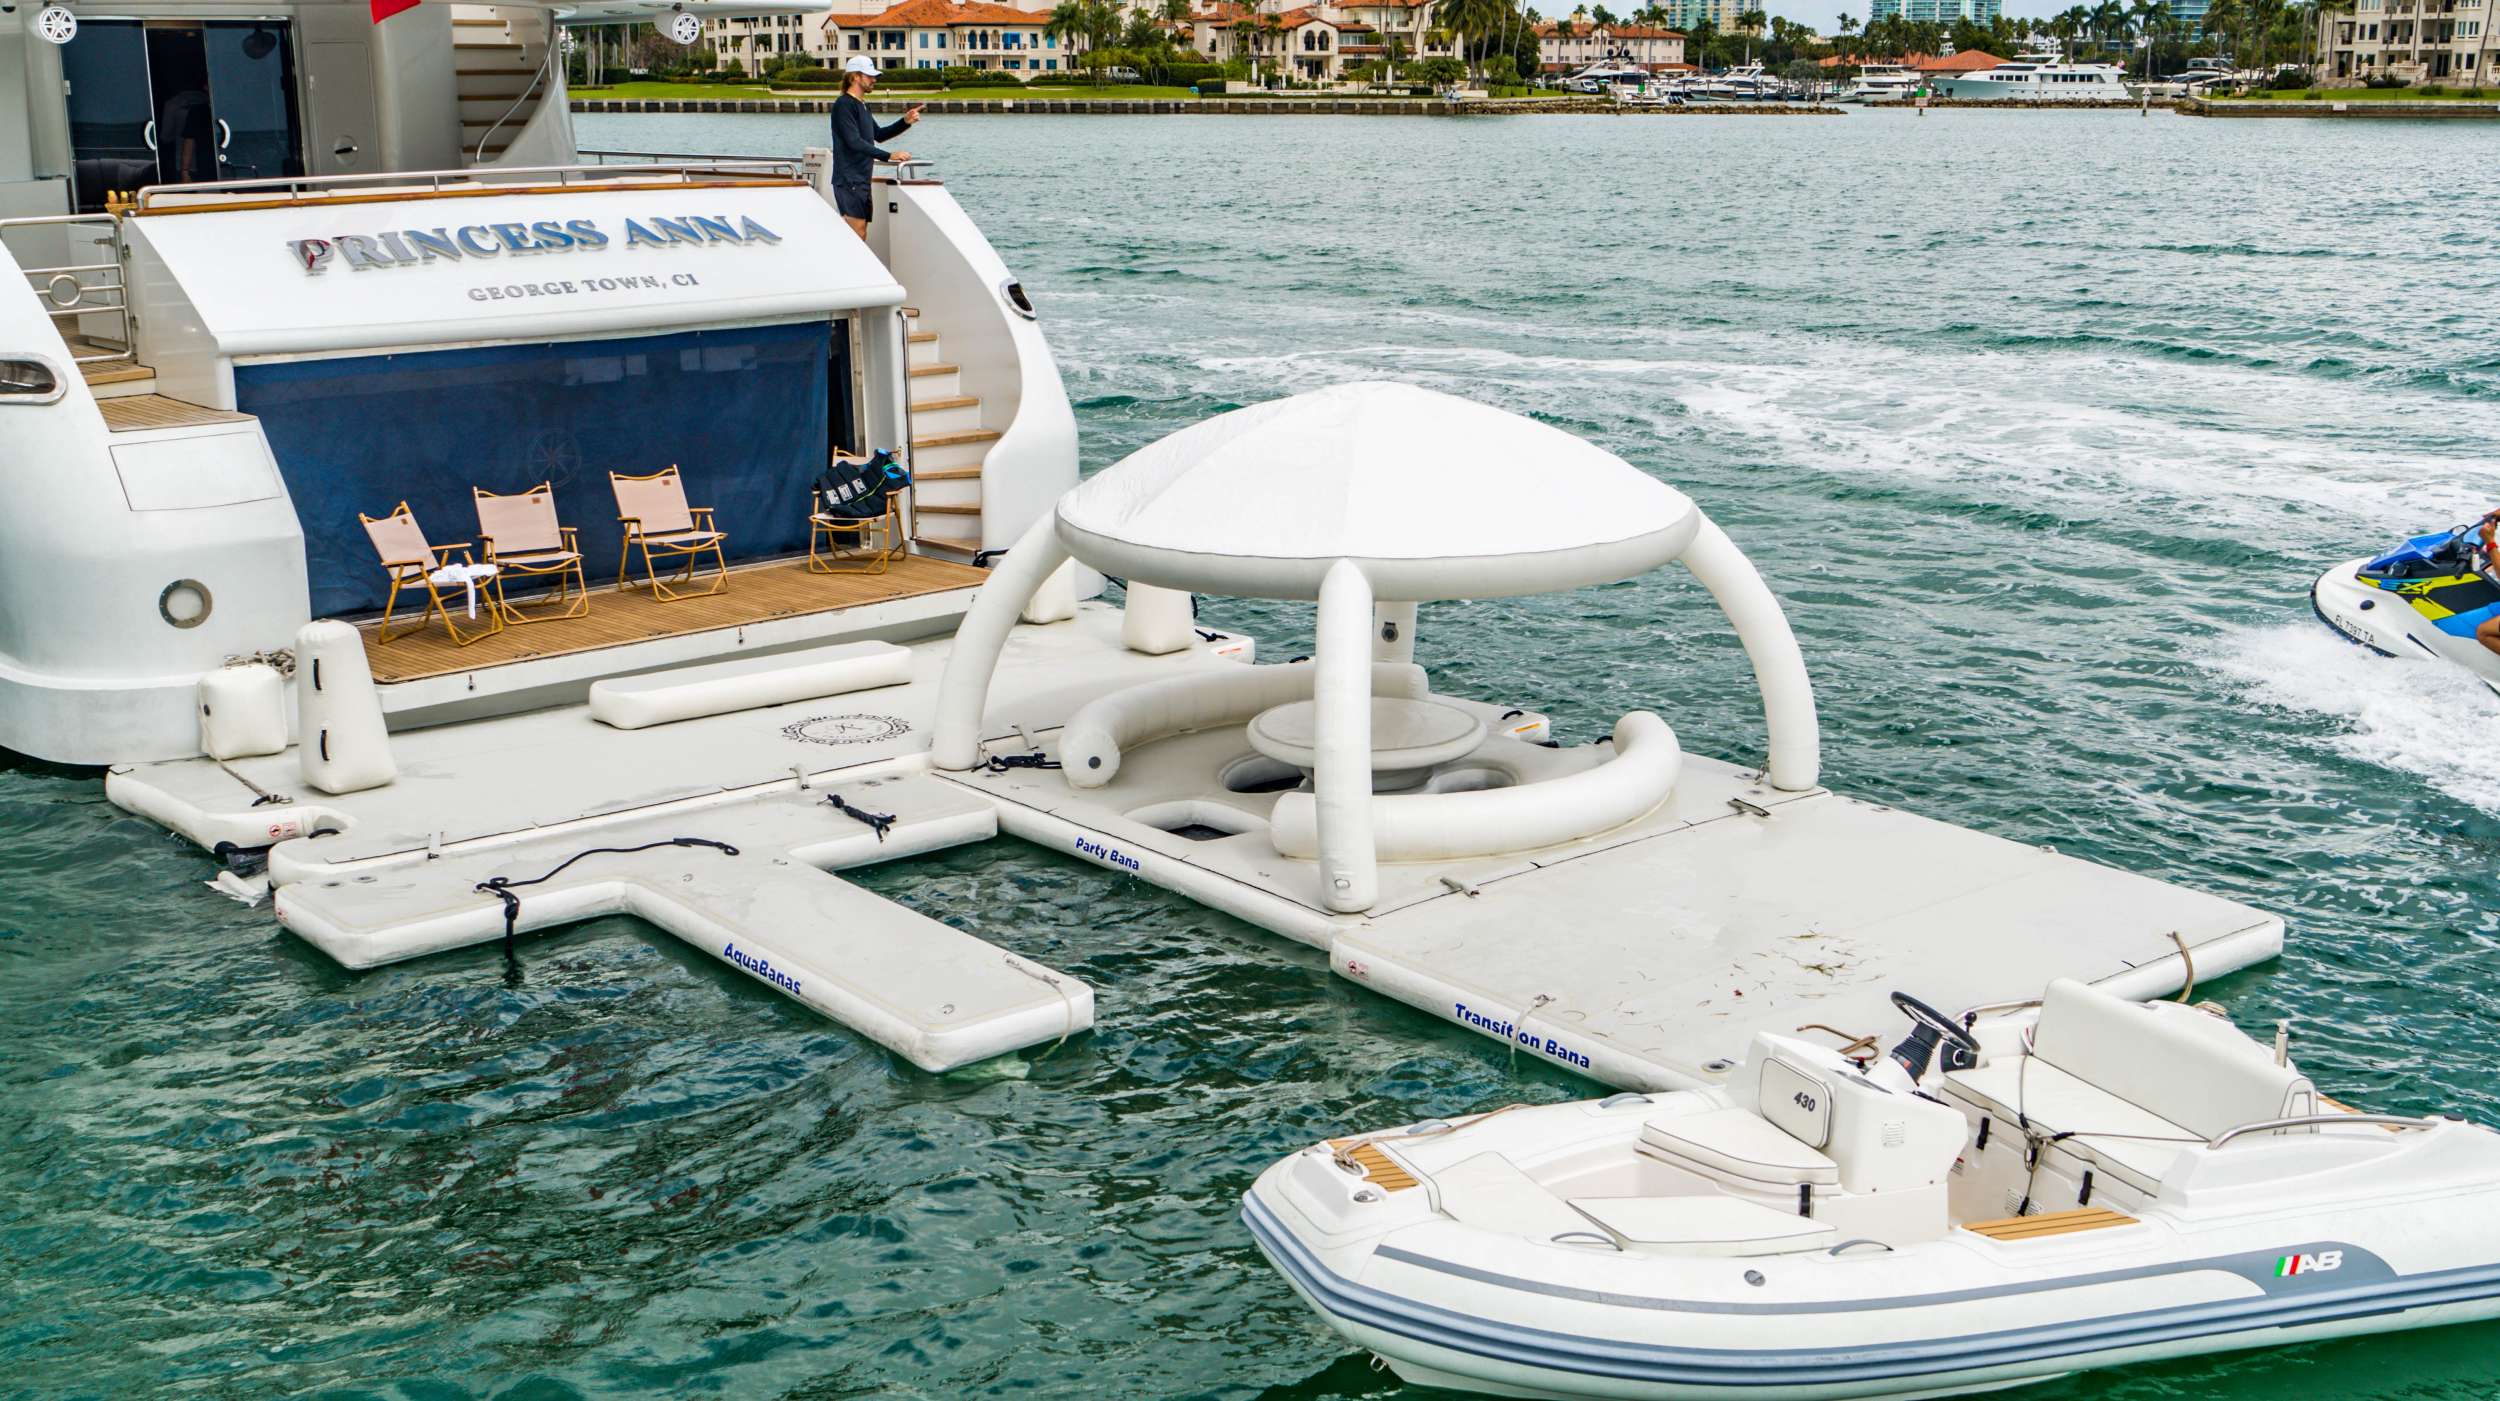 Princess Anna - Yacht Charter Fort Lauderdale & Boat hire in Florida & Bahamas 2